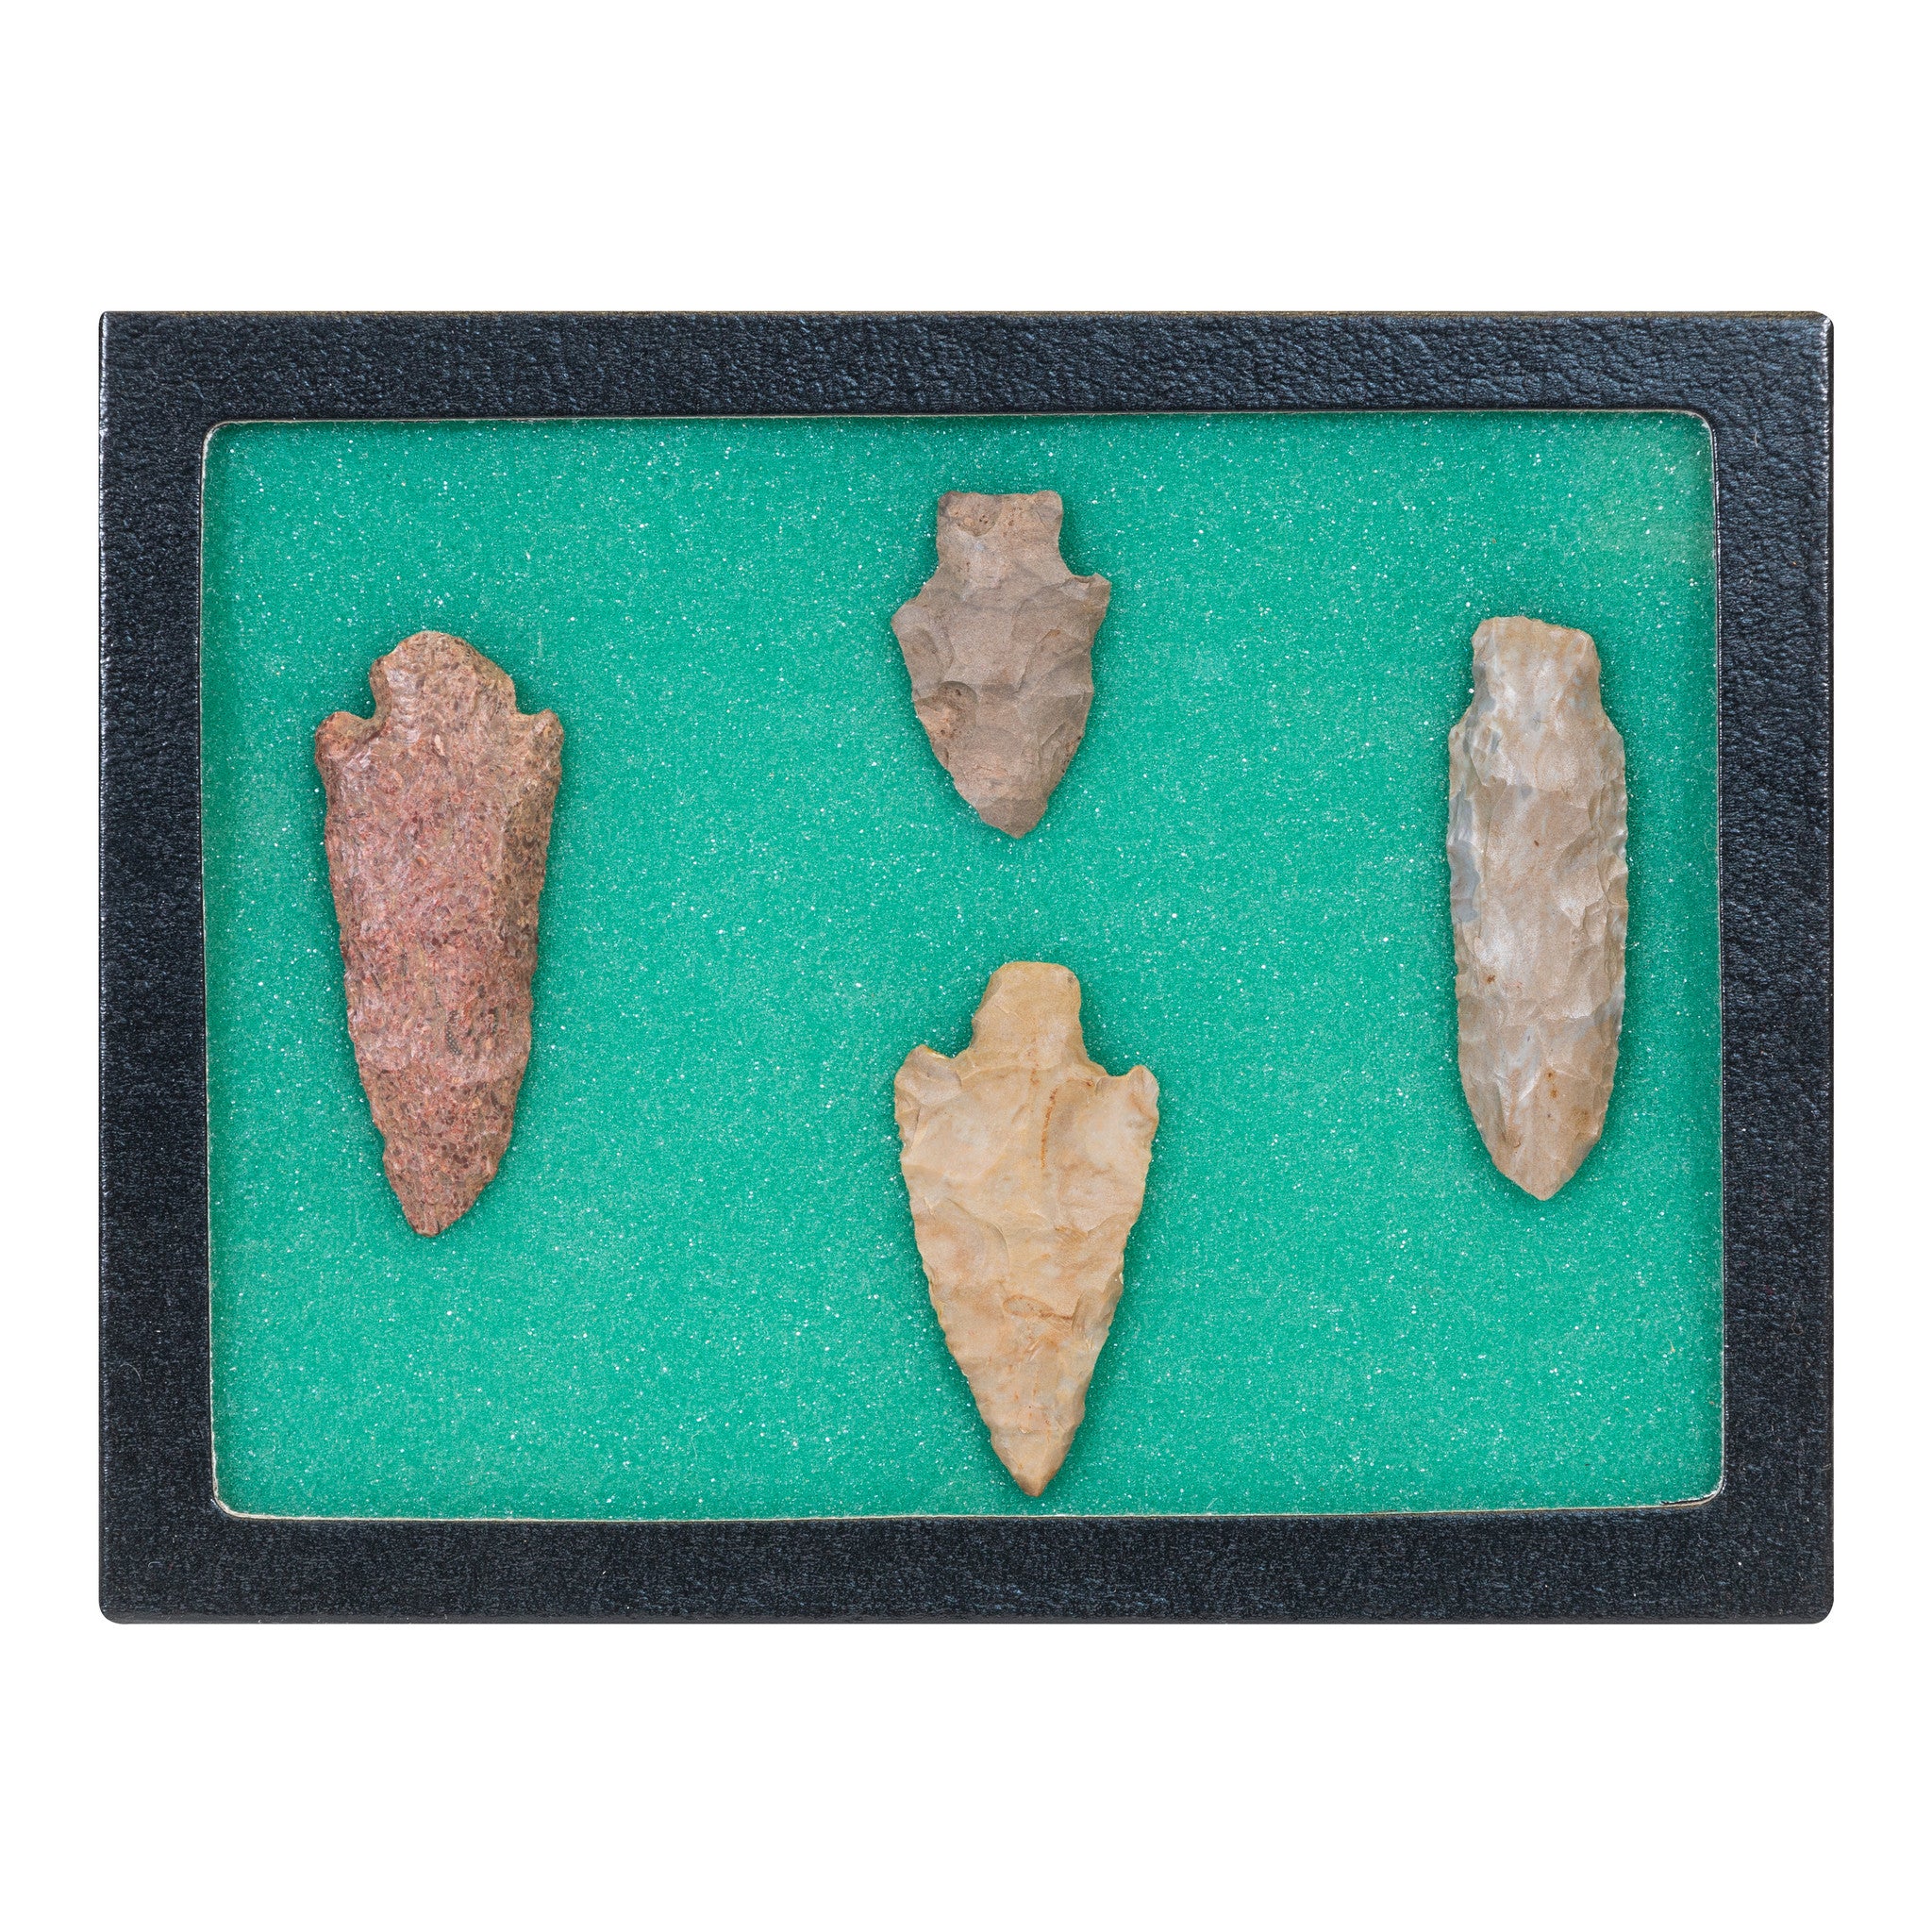 Collection of 4 Arrowheads, Native, Stone and Tools, Arrowhead